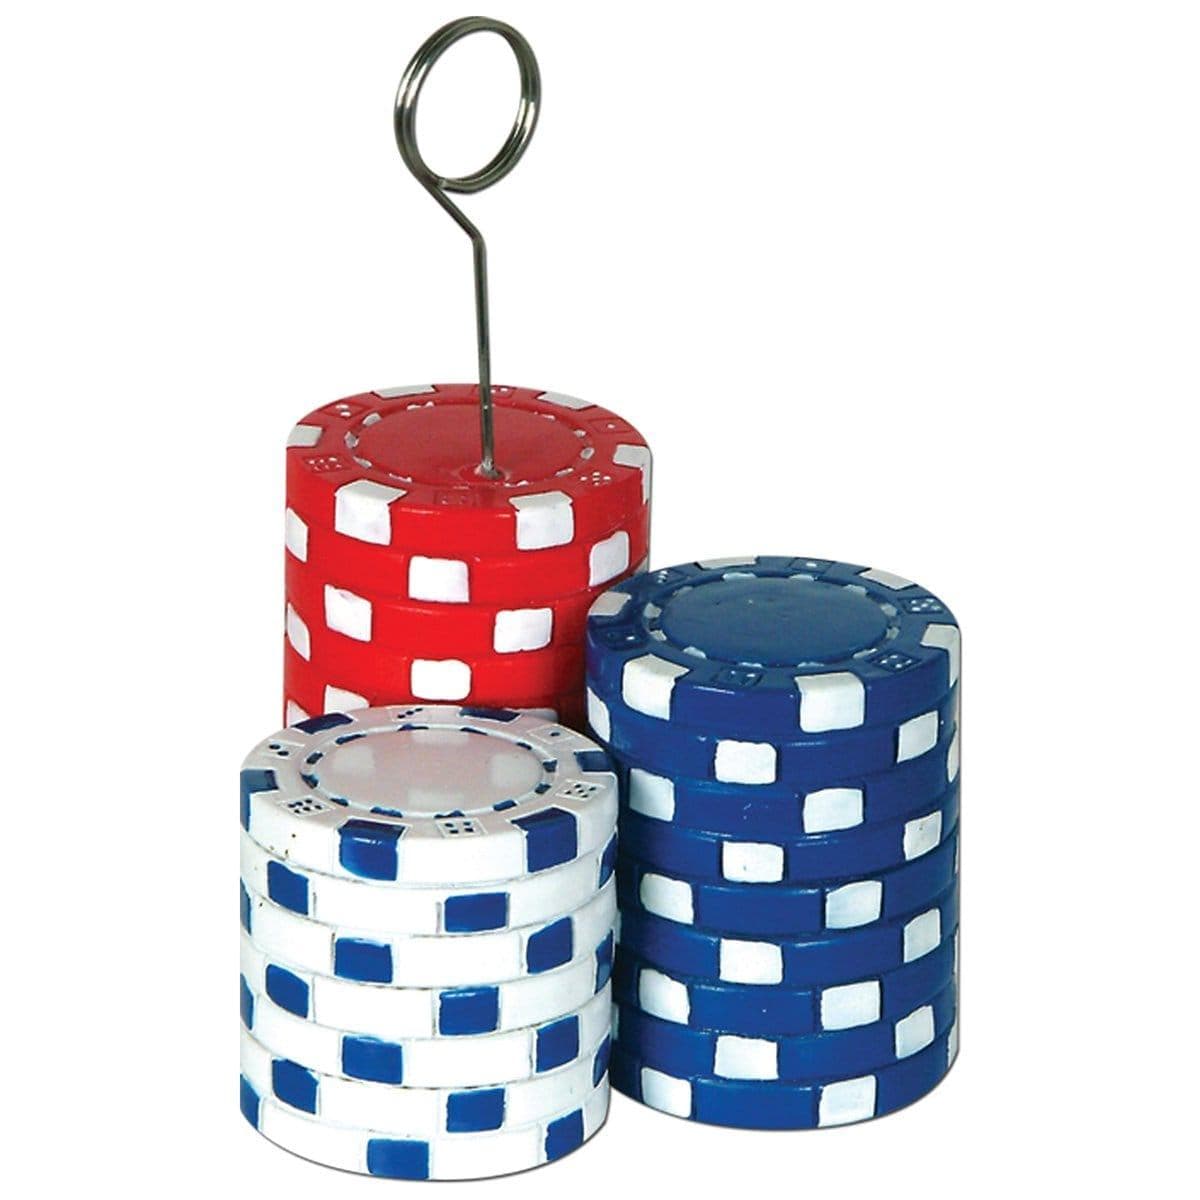 Buy Theme Party Poker Chips Balloon Weight sold at Party Expert